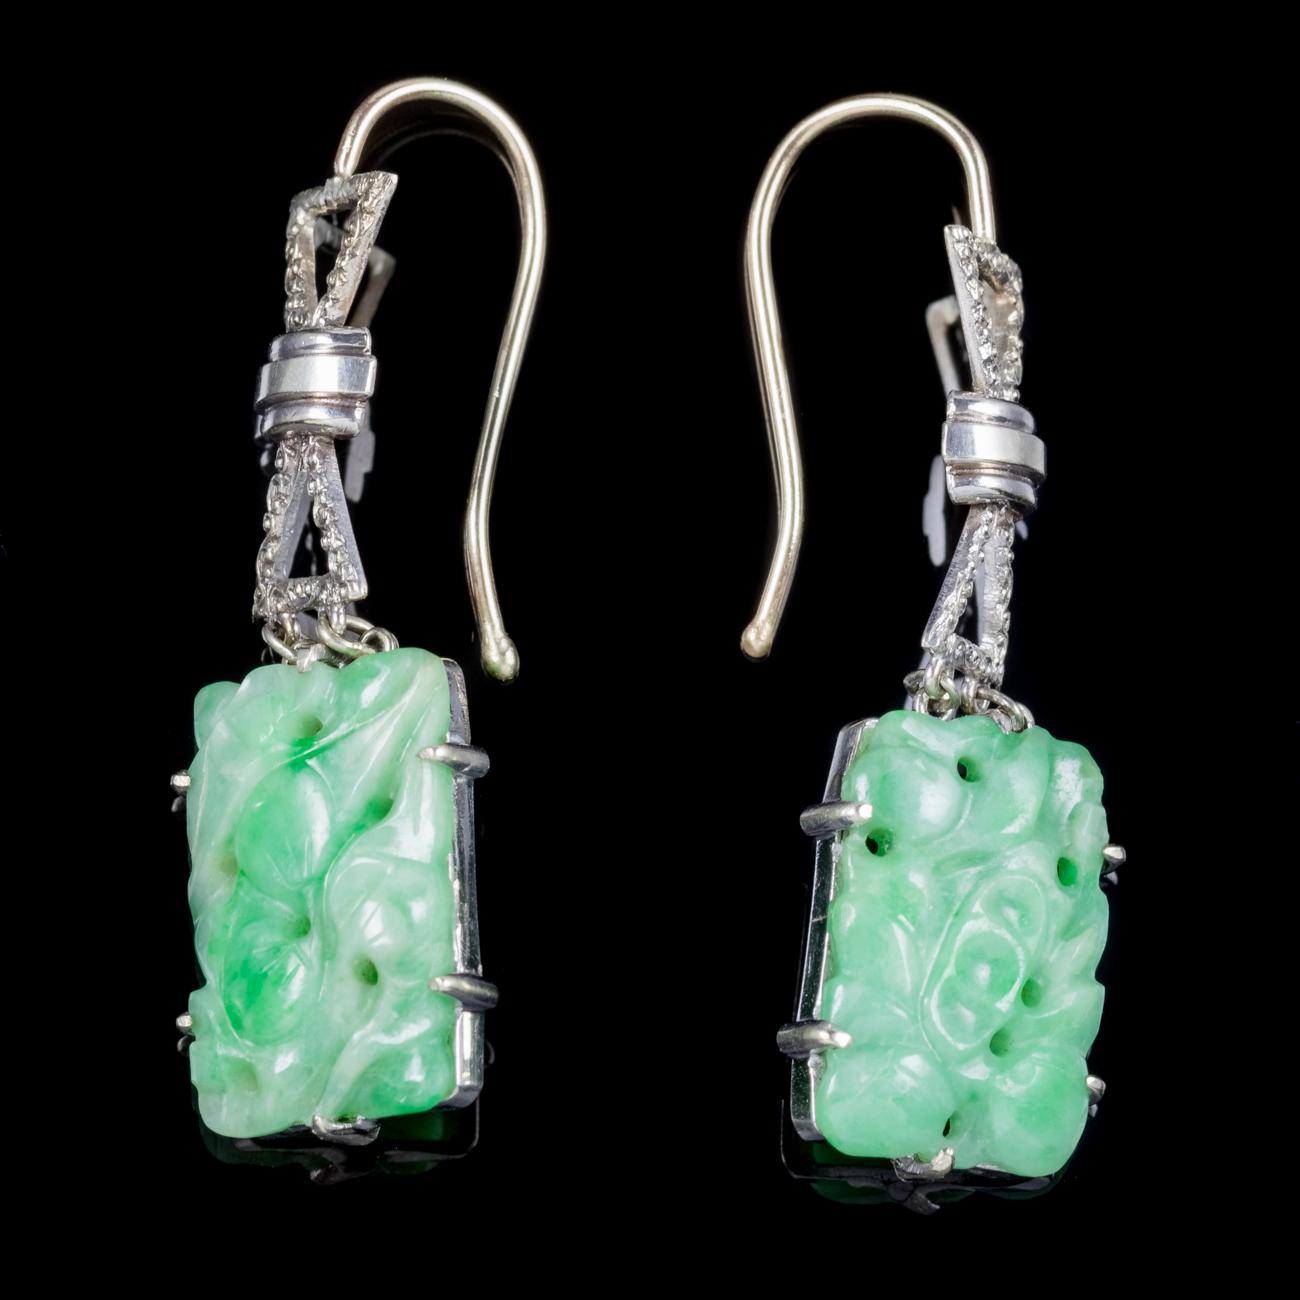 A lovely pair of antique Edwardian drop earrings set with two beautiful carved Jade stones.
Jade is considered the ultimate ‘Dream Stone’ and has been admired in ancient cultures throughout the world as a protective talisman, assuring long life and